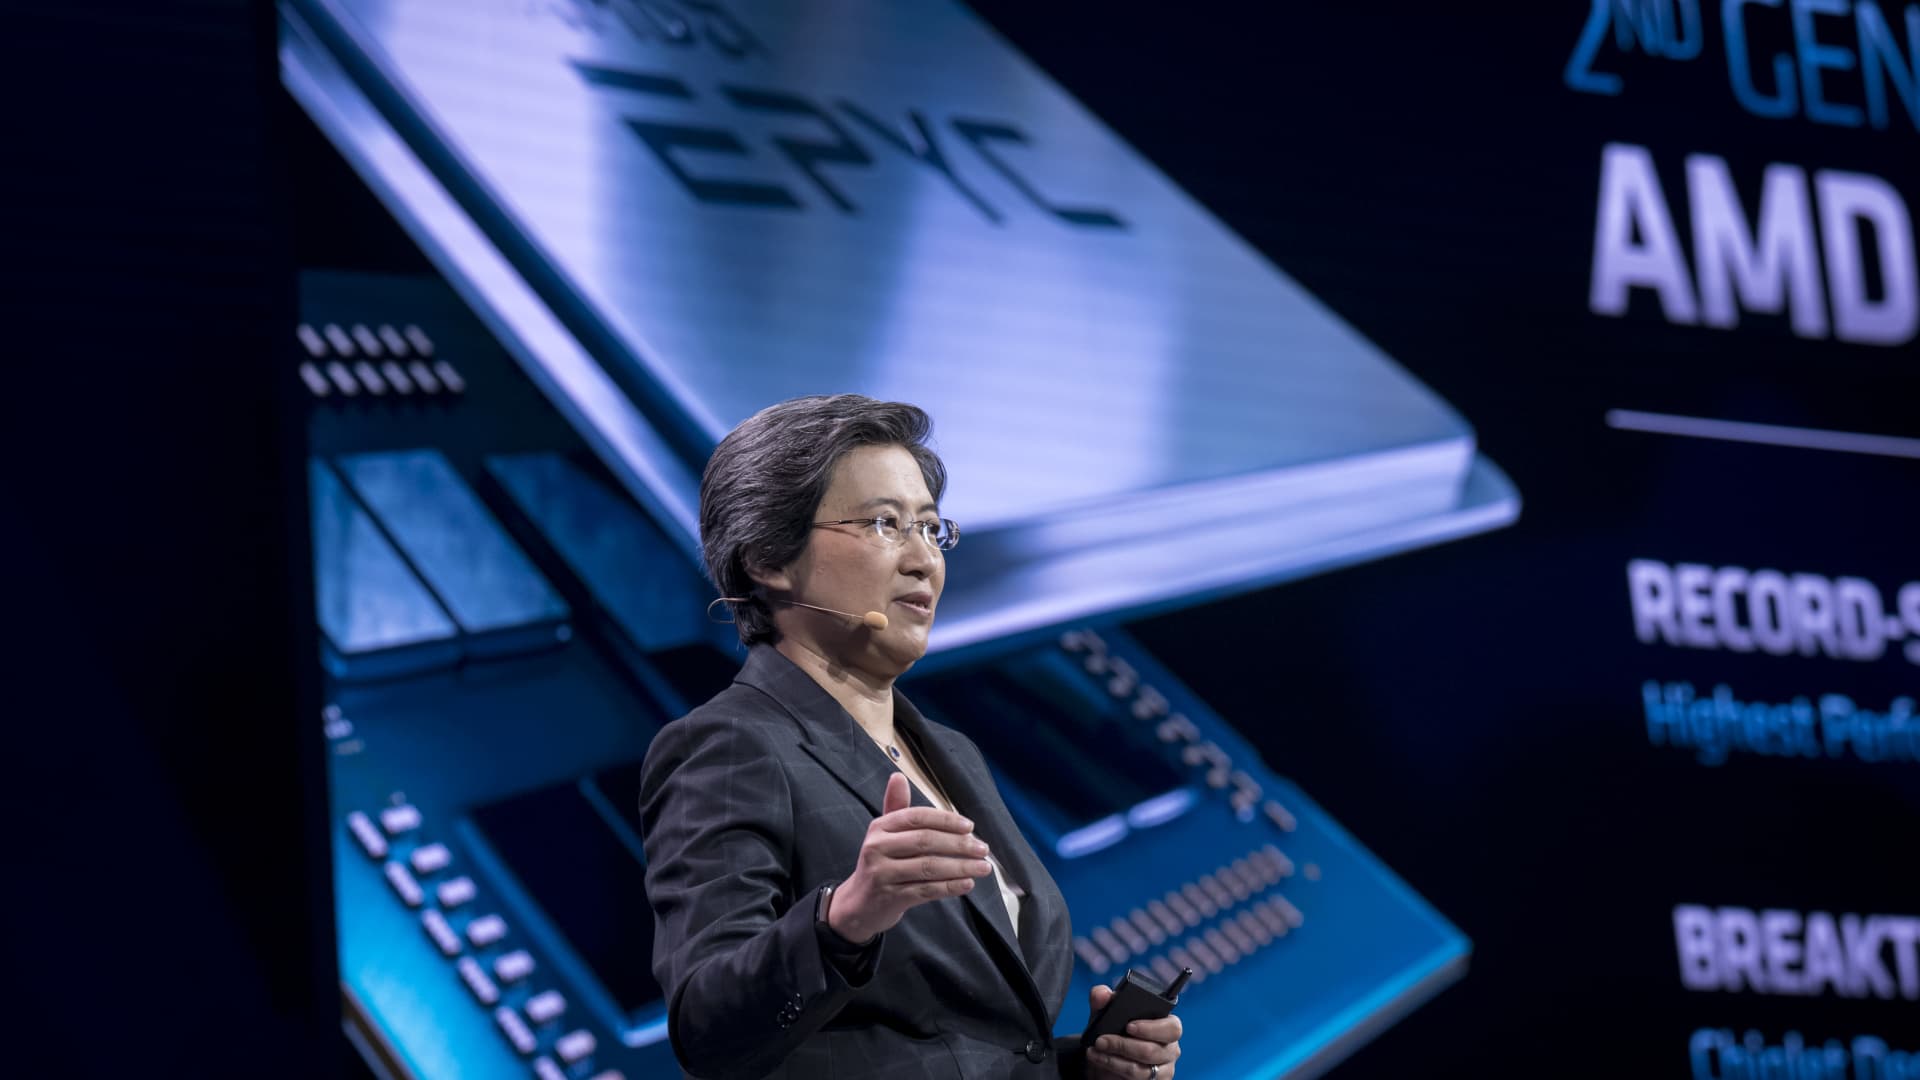 AMD beats on earnings and revenue, but third-quarter forecast comes in light